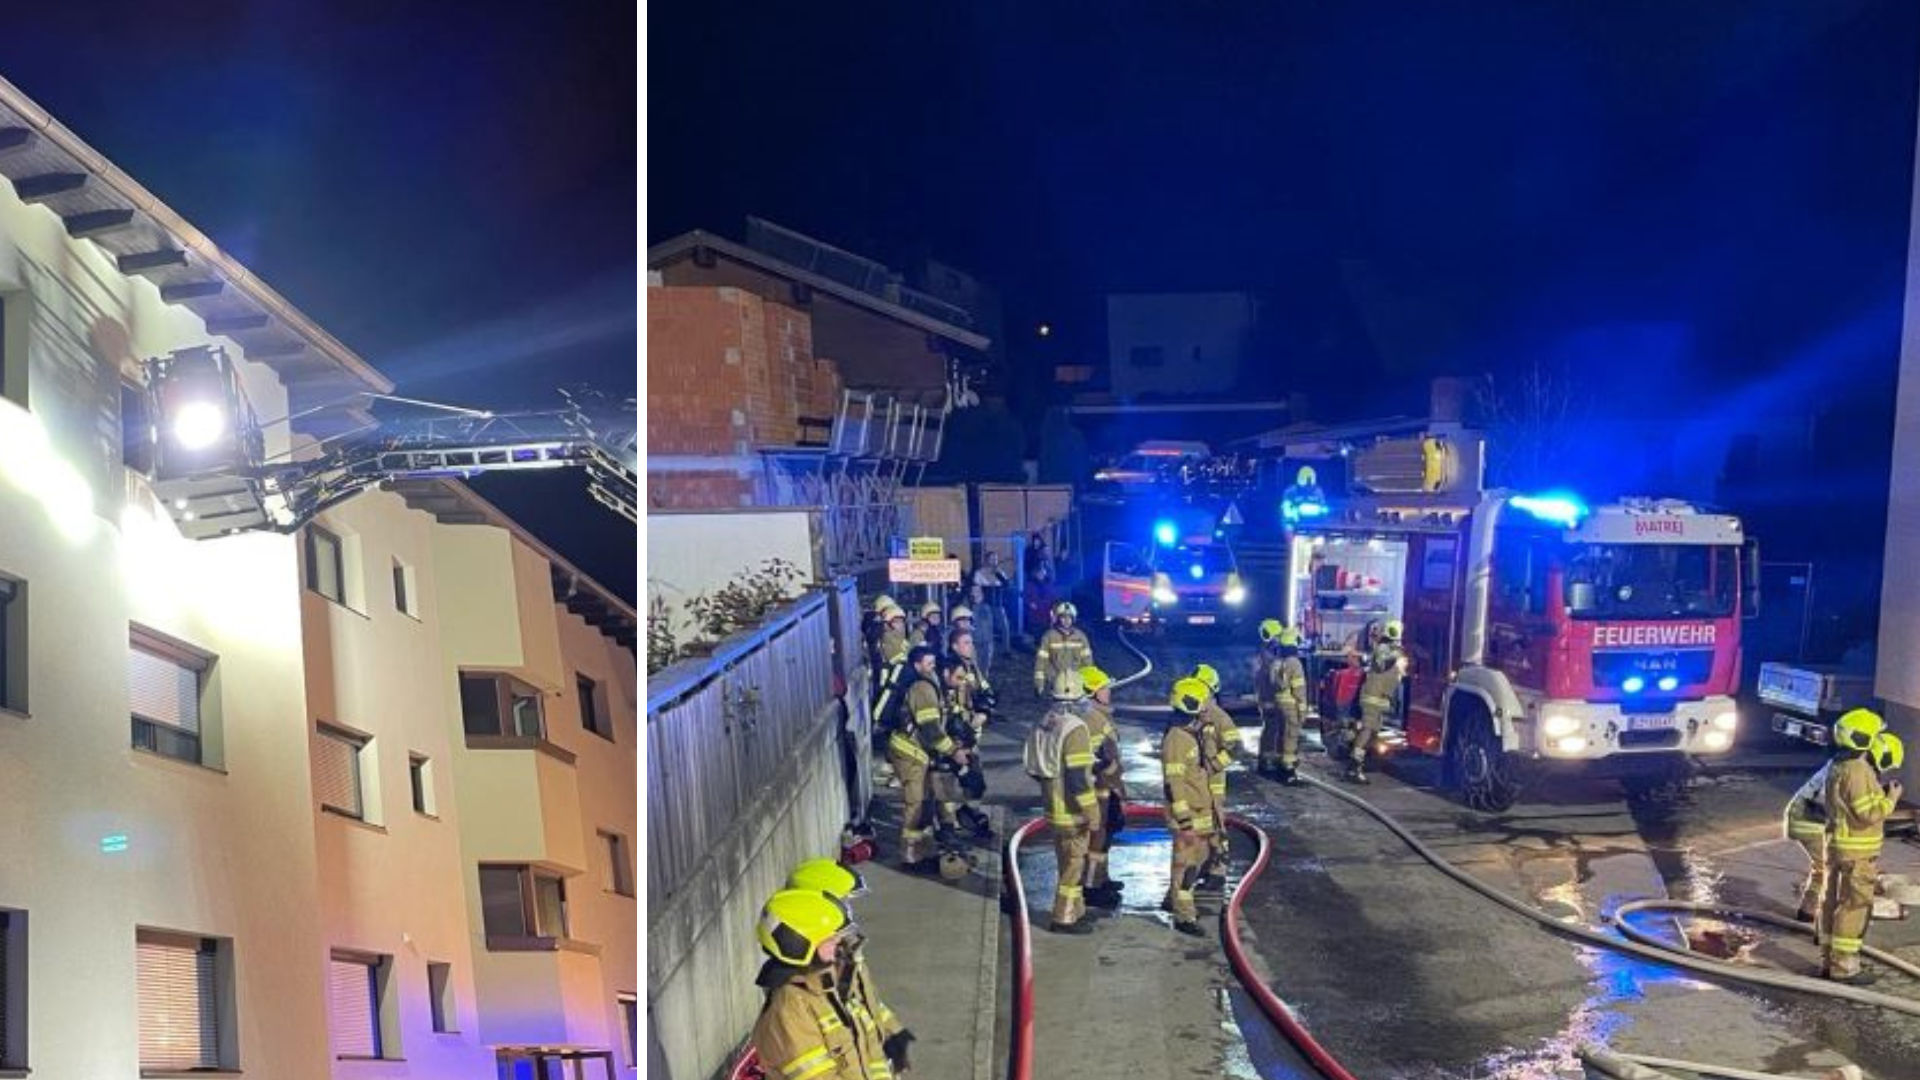 The 83-year-old resident was brought to safety by the fire department using a turntable ladder. (Bild: Feuerwehr Matrei in Osttirol)